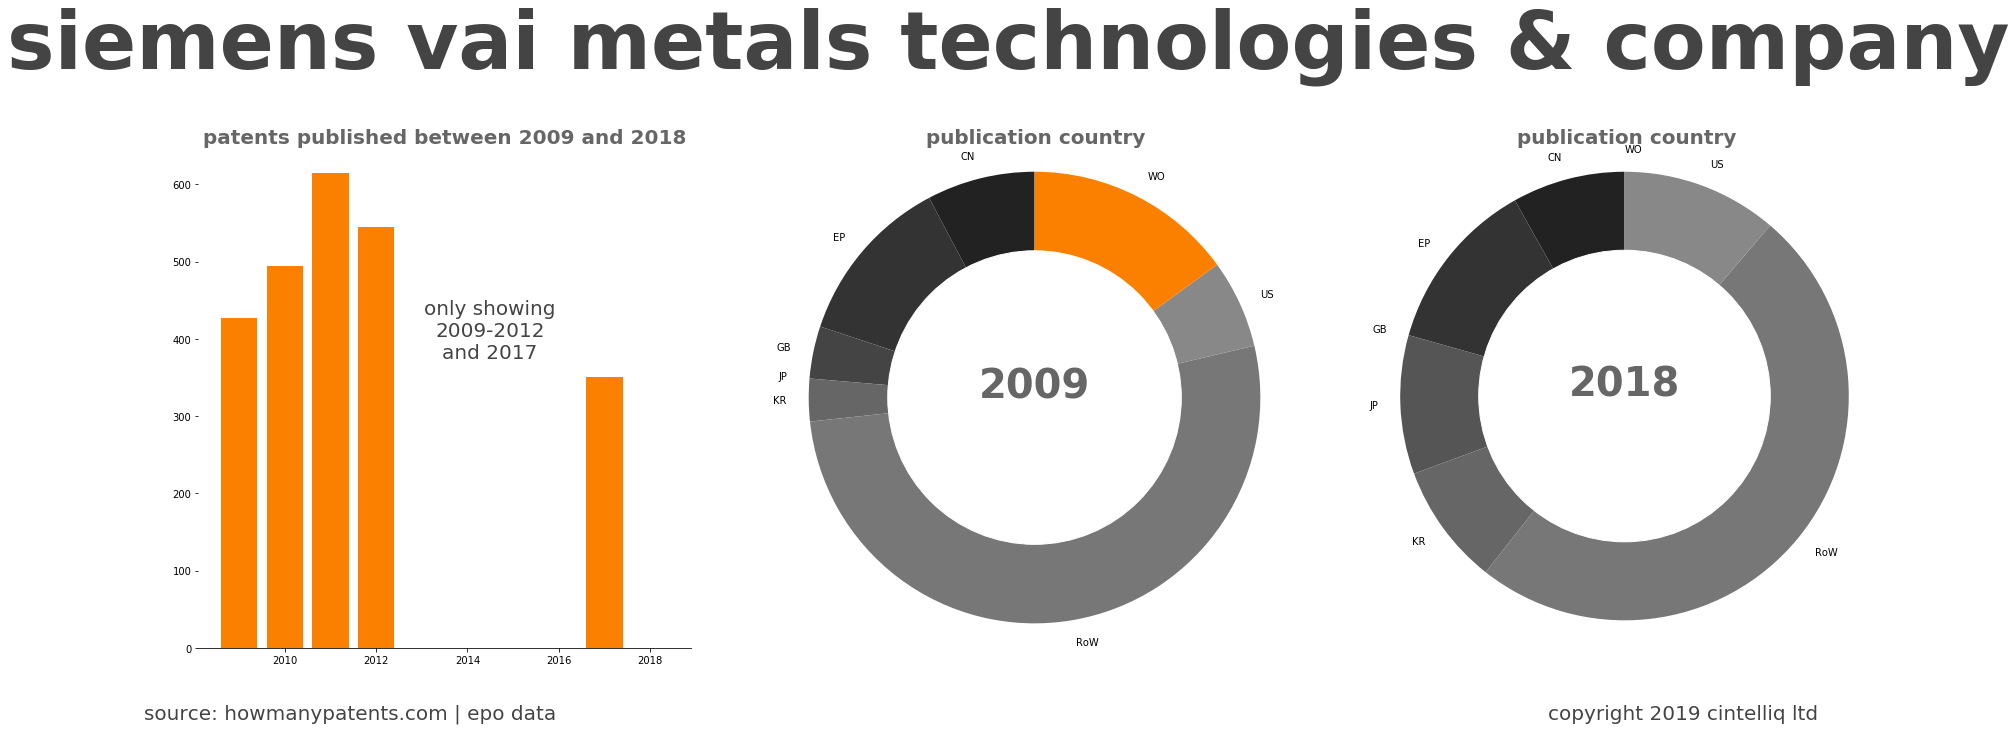 summary of patents for Siemens Vai Metals Technologies & Company